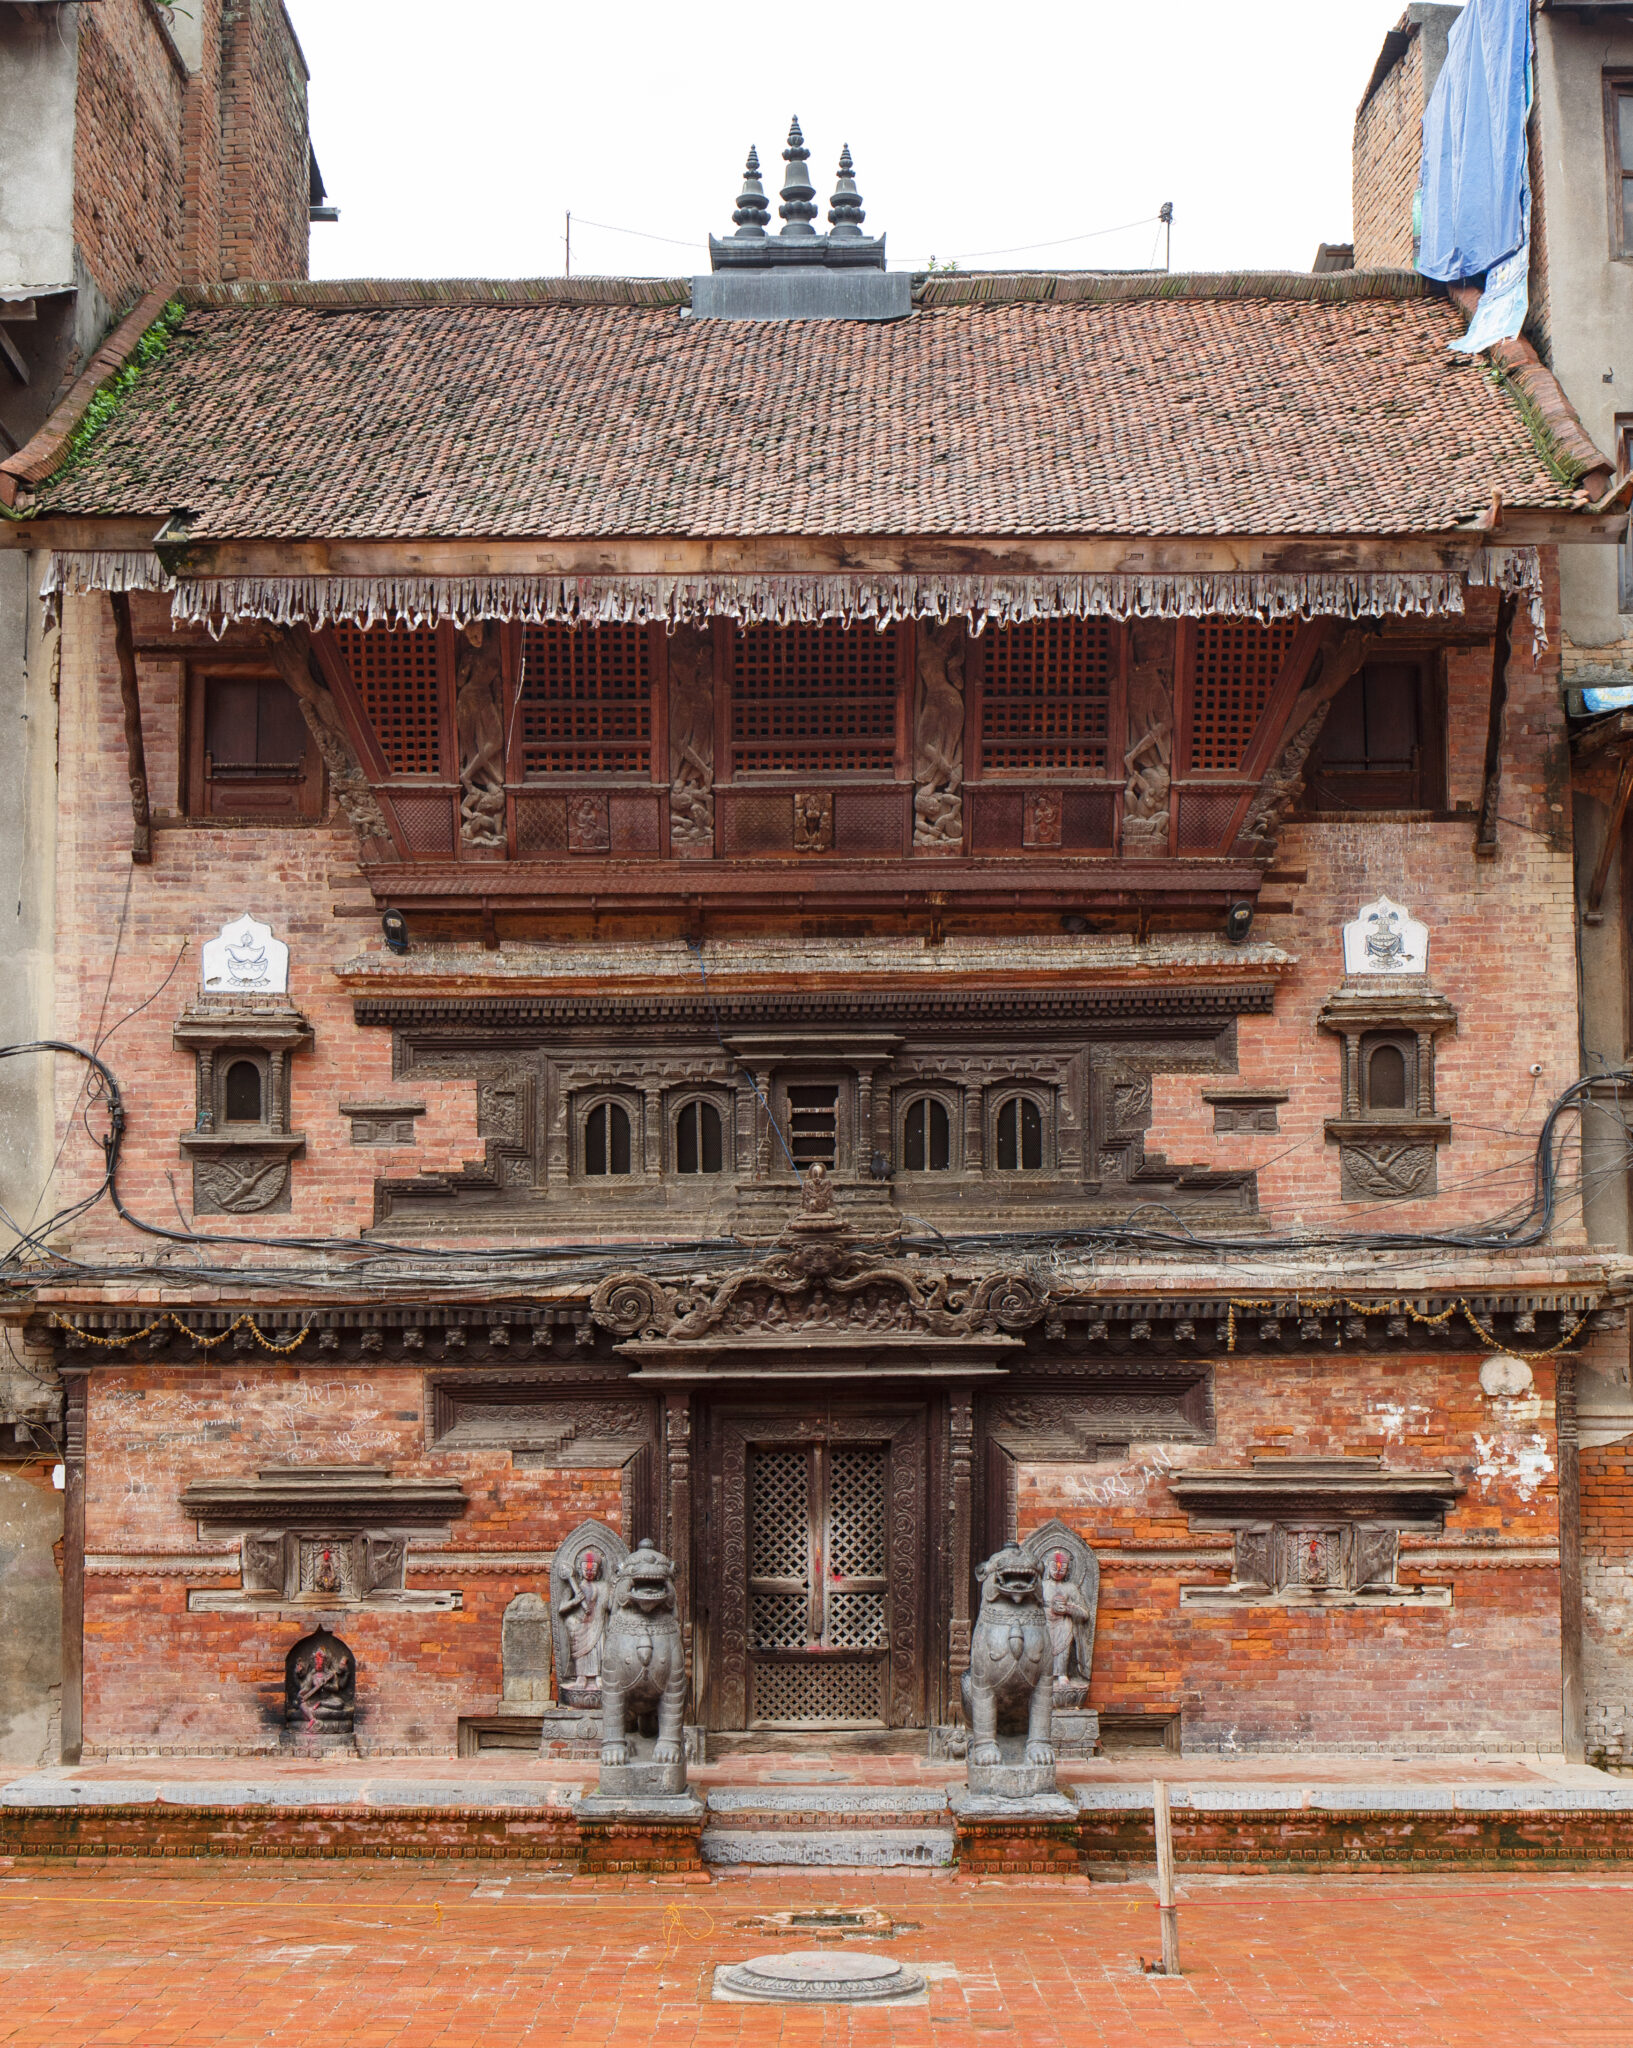 Facade of three-story orange-brown brick building with densely carved woodwork at door, windows, eaves, and lintels